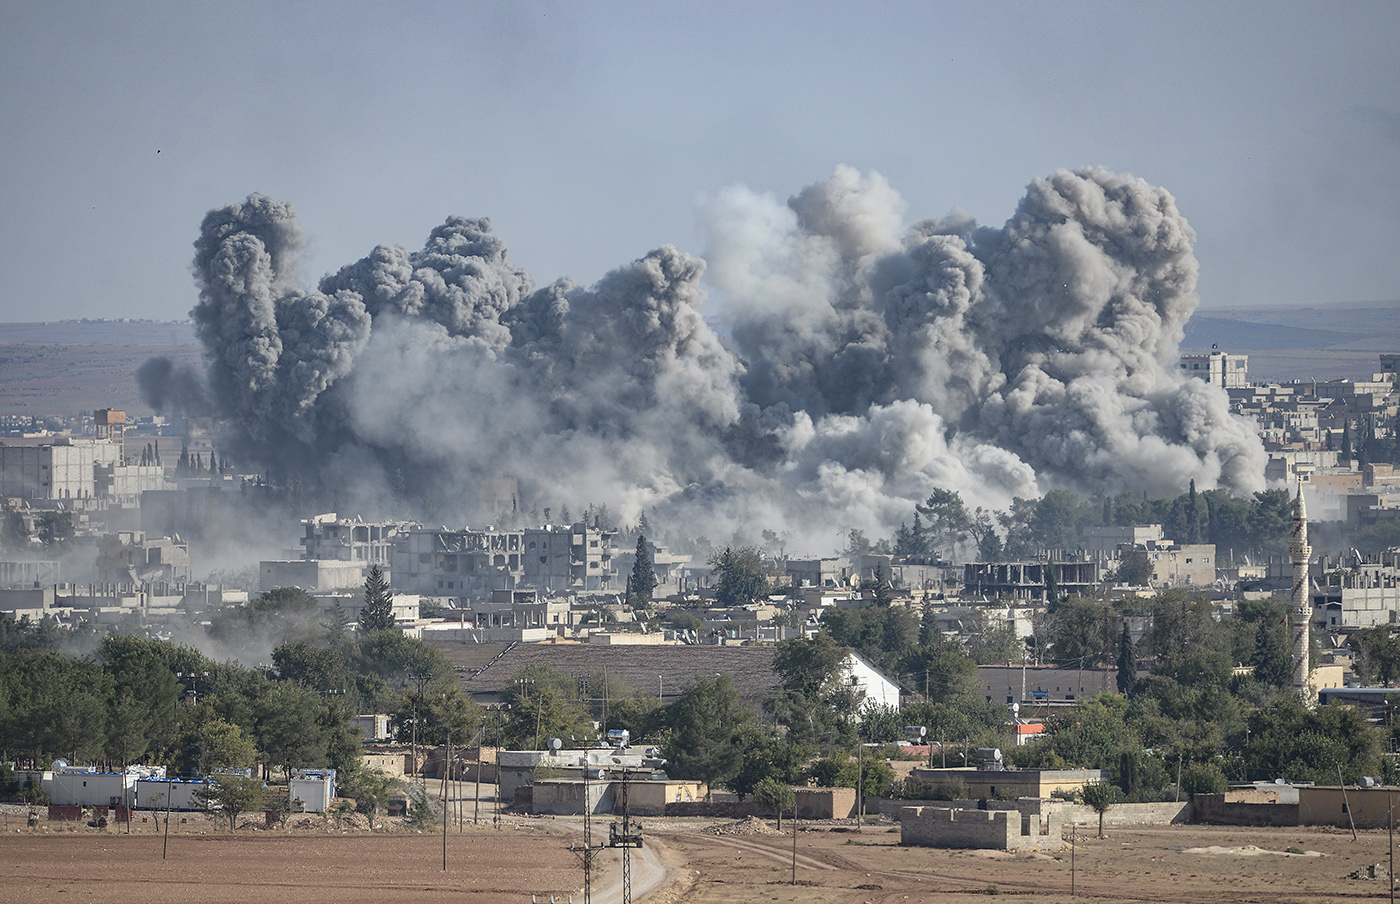 An explosion after an apparent US-led coalition airstrike on Kobane, Syria, as seen from the Turkish side of the border, near Suruc district, Sanliurfa, Turkey, 18 October 2014.